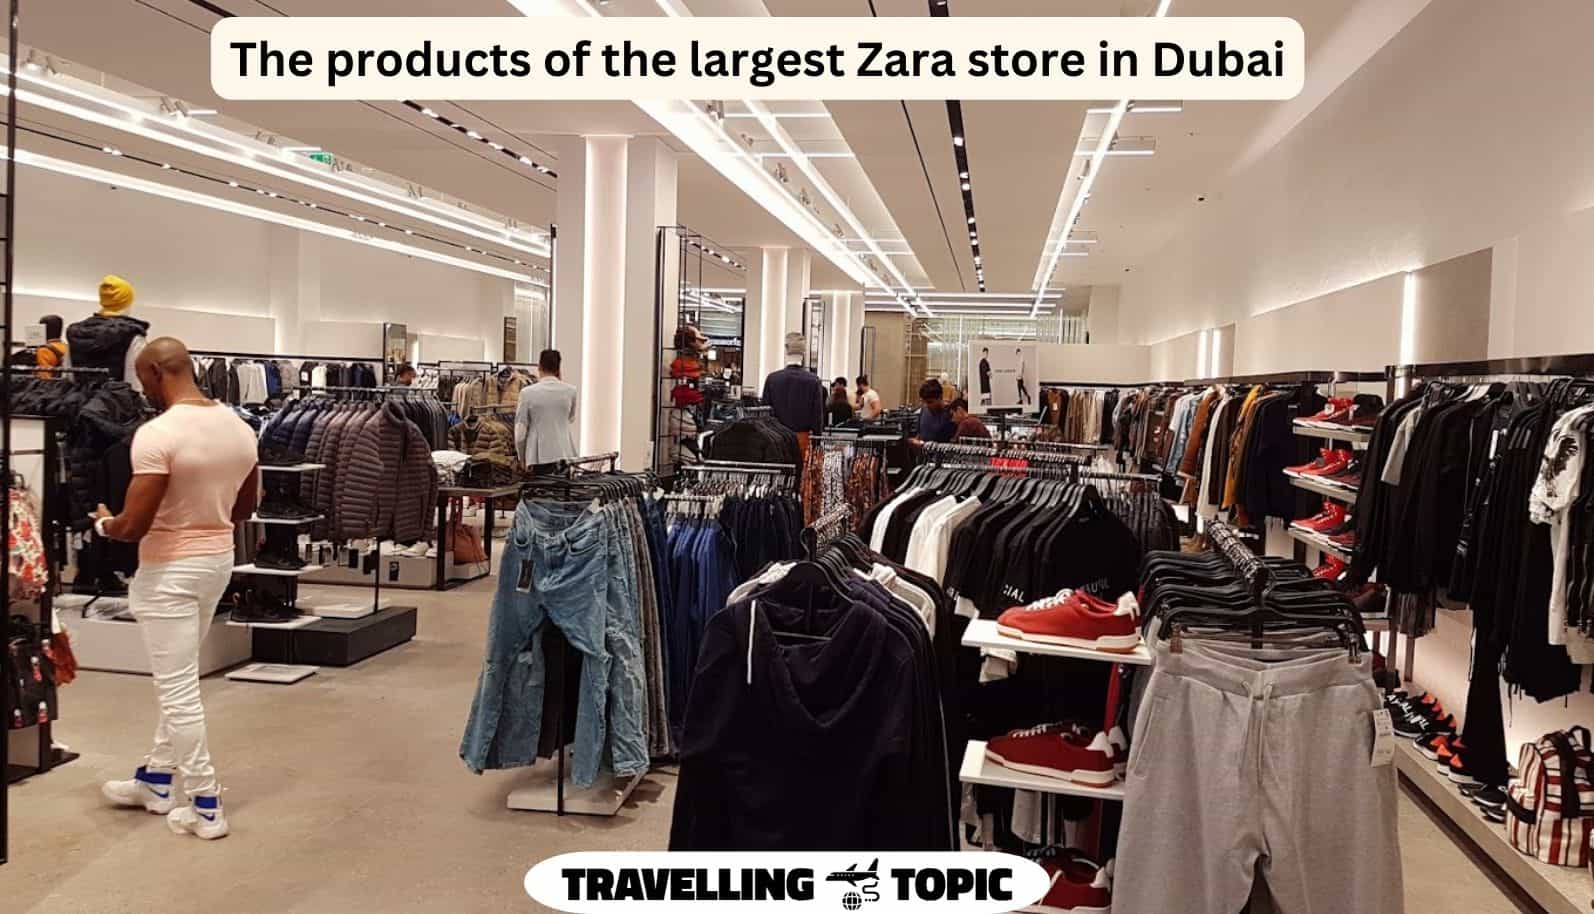 The products of the largest Zara store in Dubai